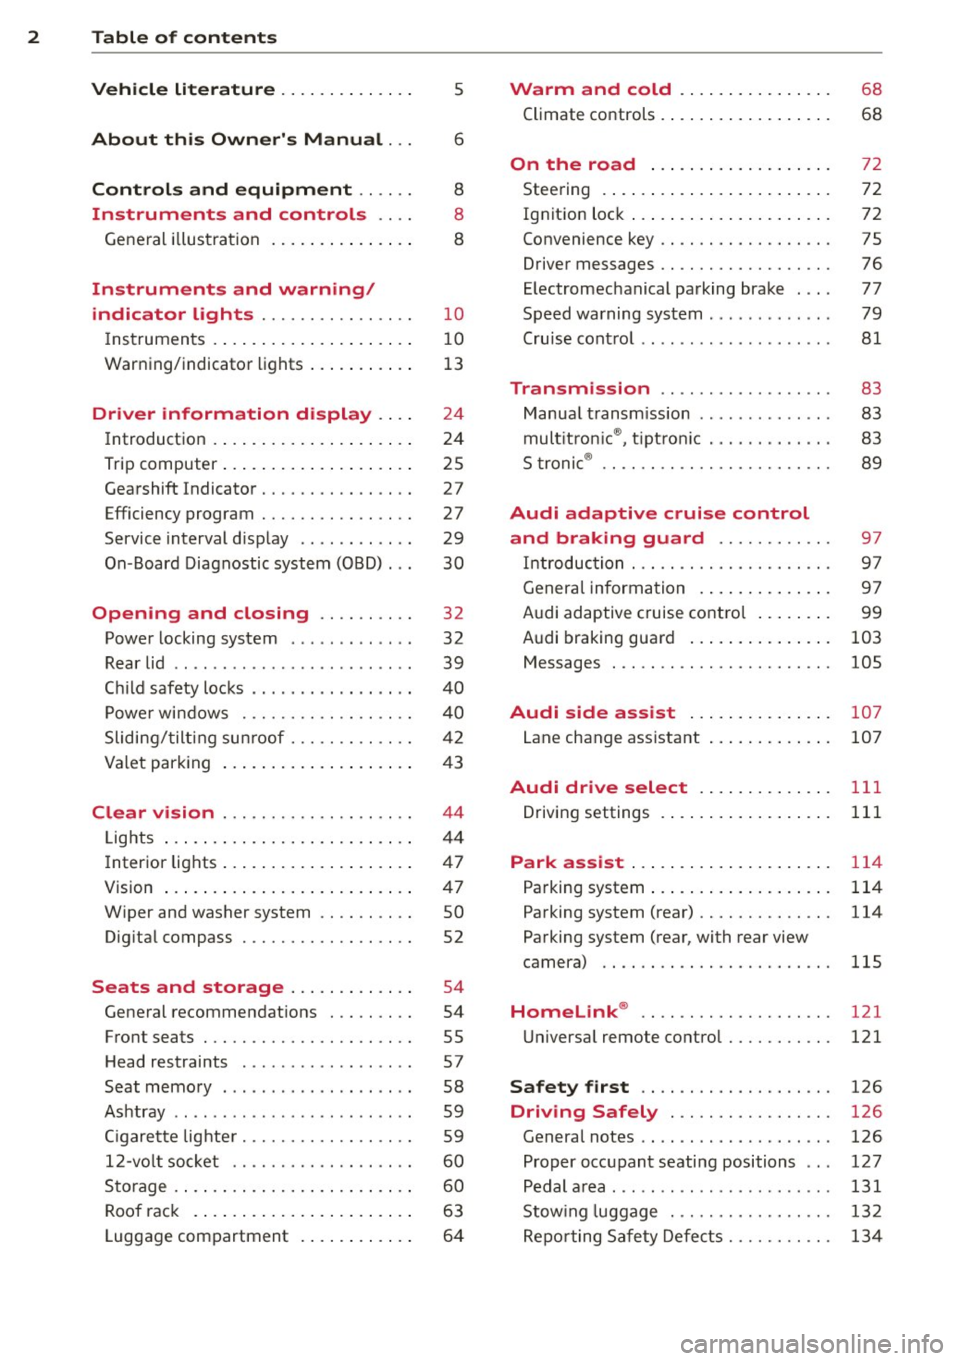 AUDI S4 SEDAN 2013  Owners Manual 2  Table  of  contents Vehicle  literature  .. .. .. .. .. ... . 
5 
About  this  Owners  Manual . . . 6 
Controls  and  equipment  .. ...  . 
Ins truments  and  controls  .. . . 
General  illus trat